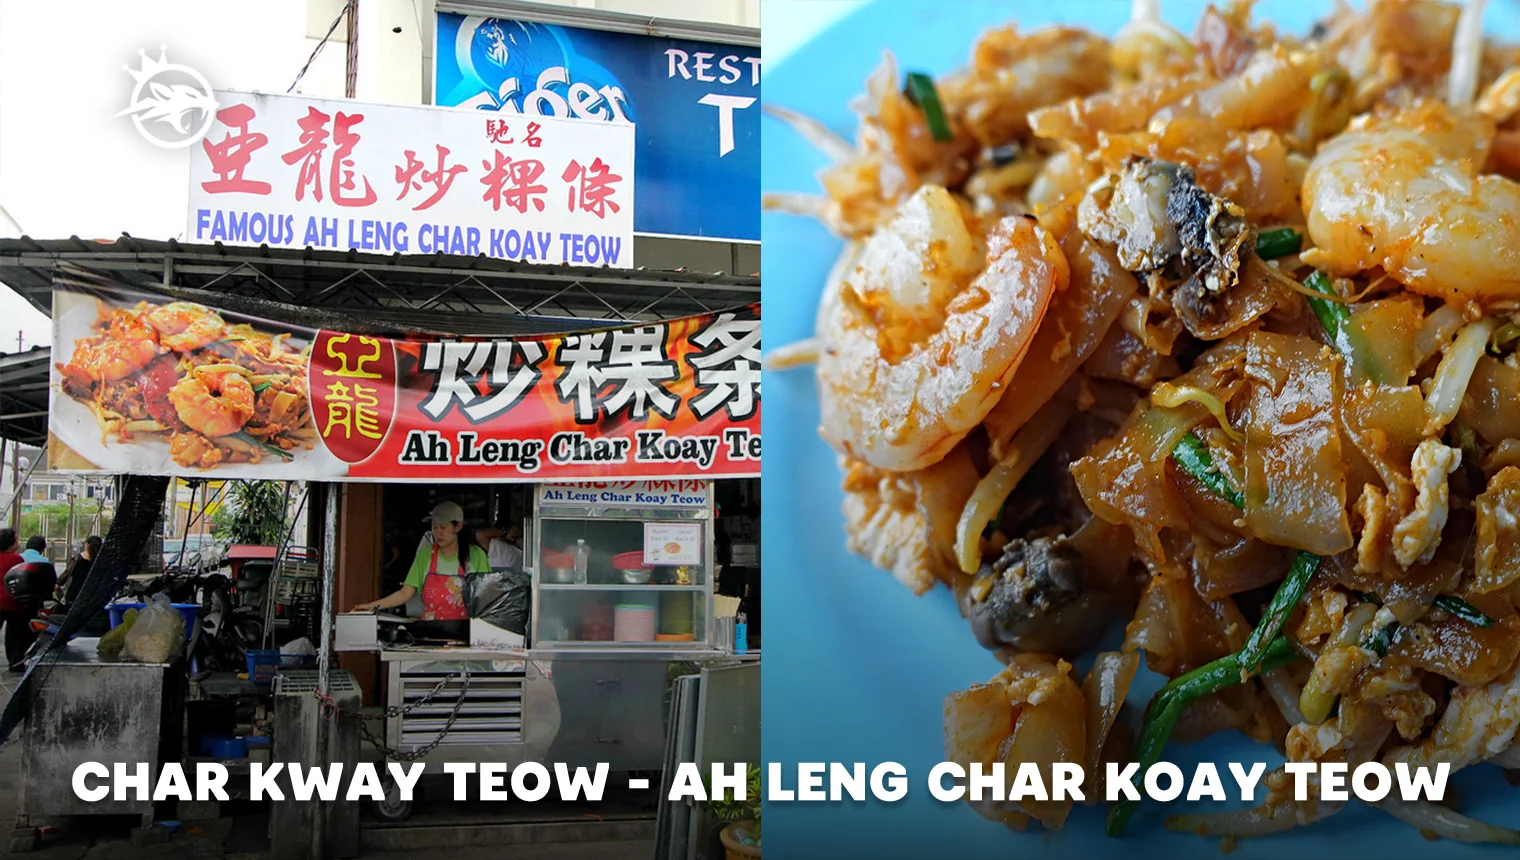 Char Kway Teow - Ah Leng Char Koay Teow